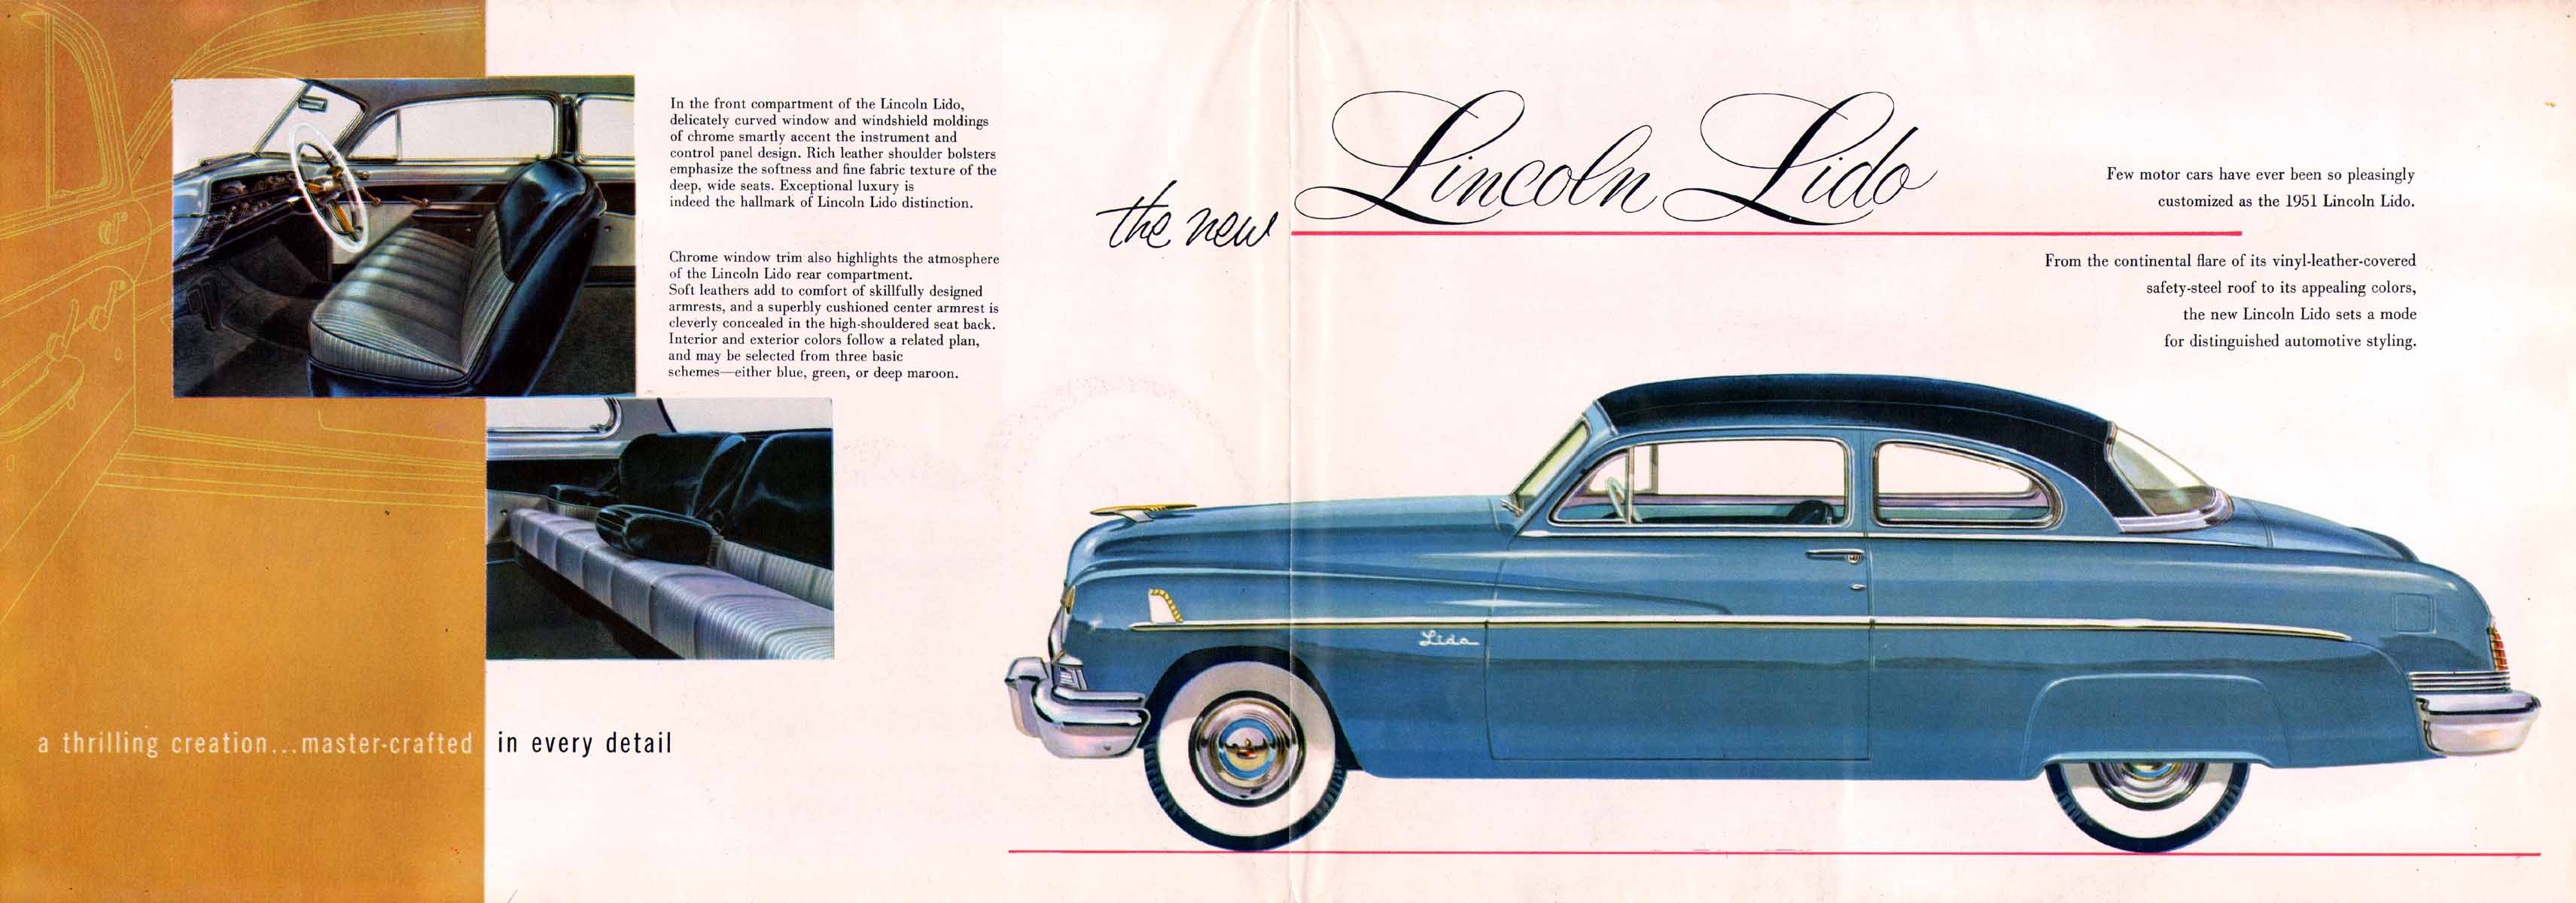 1951 Lincoln Foldout Page 5